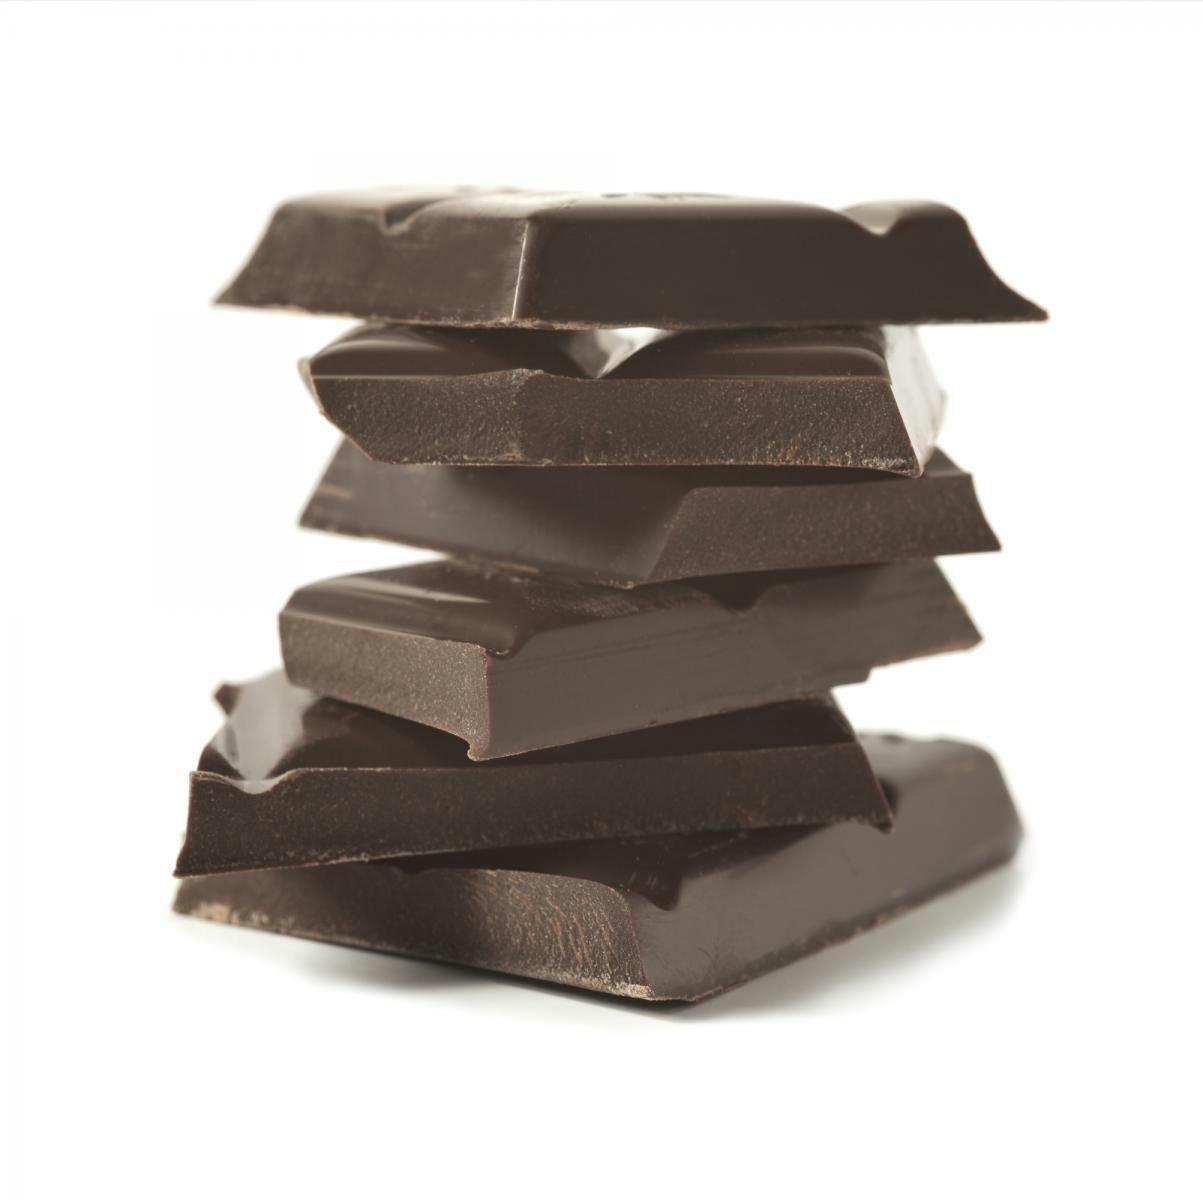 High-Calcium-Fortified Chocolate Now Easier, Thanks to New Technology